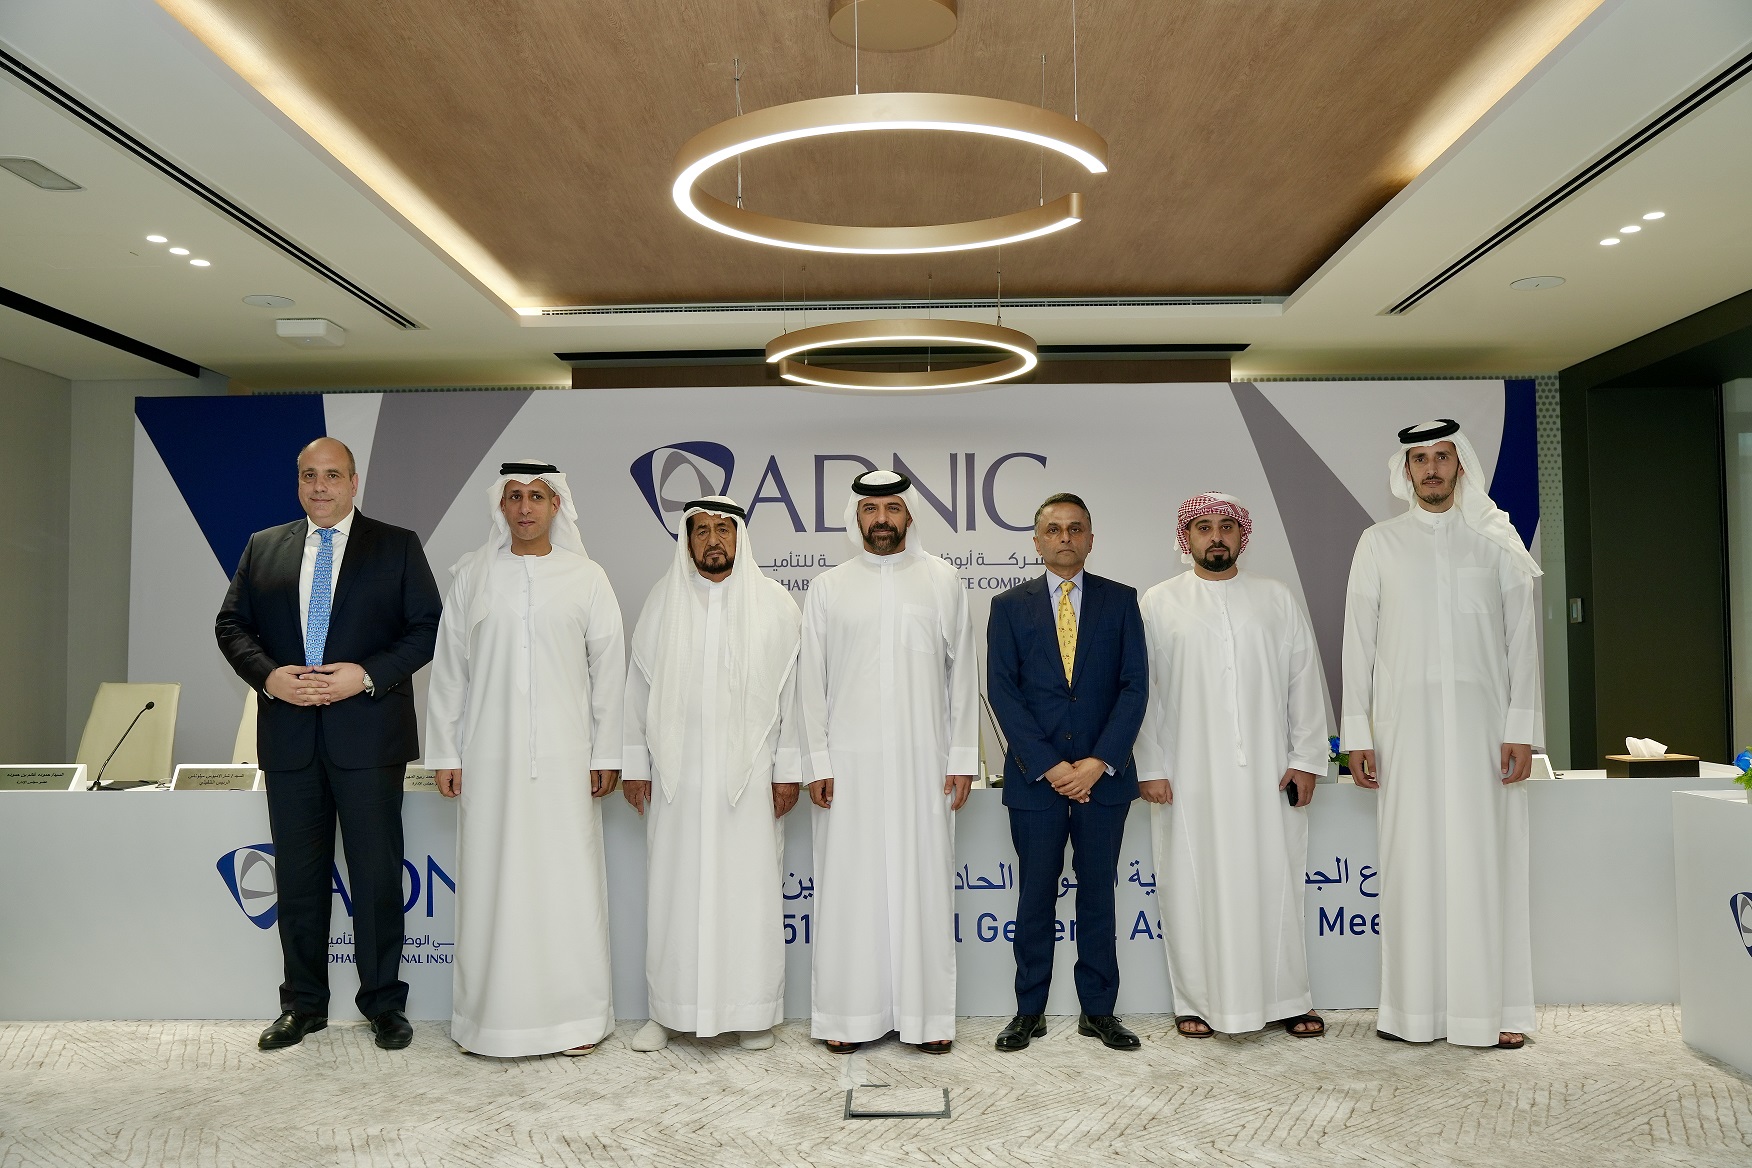 ADNIC Achieves One Of The Highest Profits In Its History Totaling AED 401.2 Million